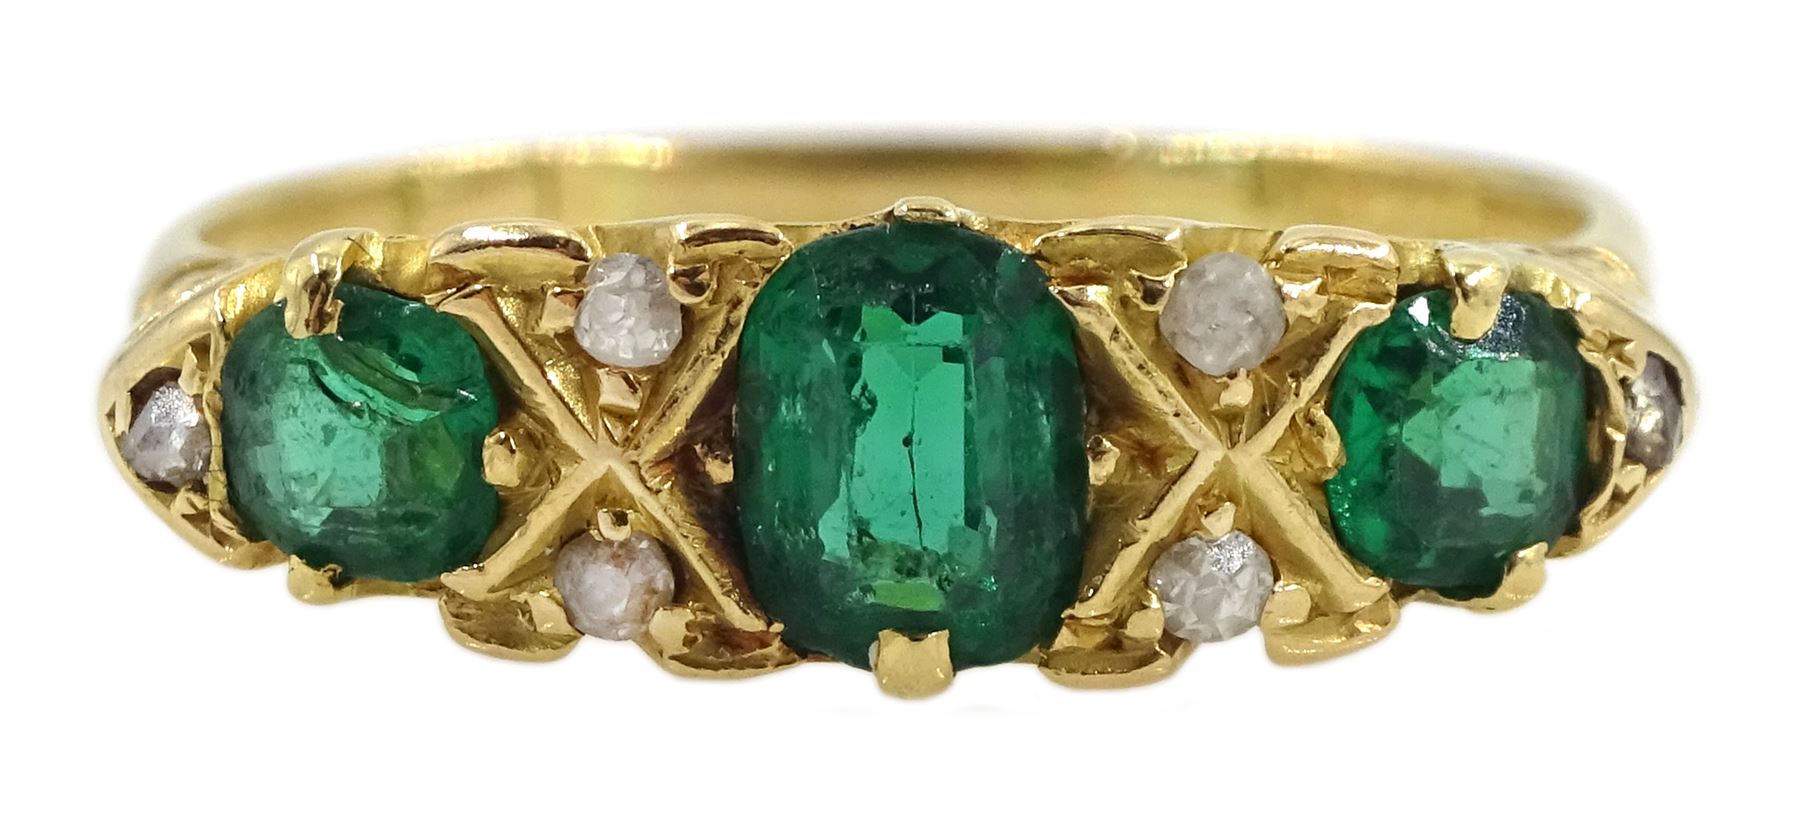 Early 20th century 18ct gold three stone emerald ring